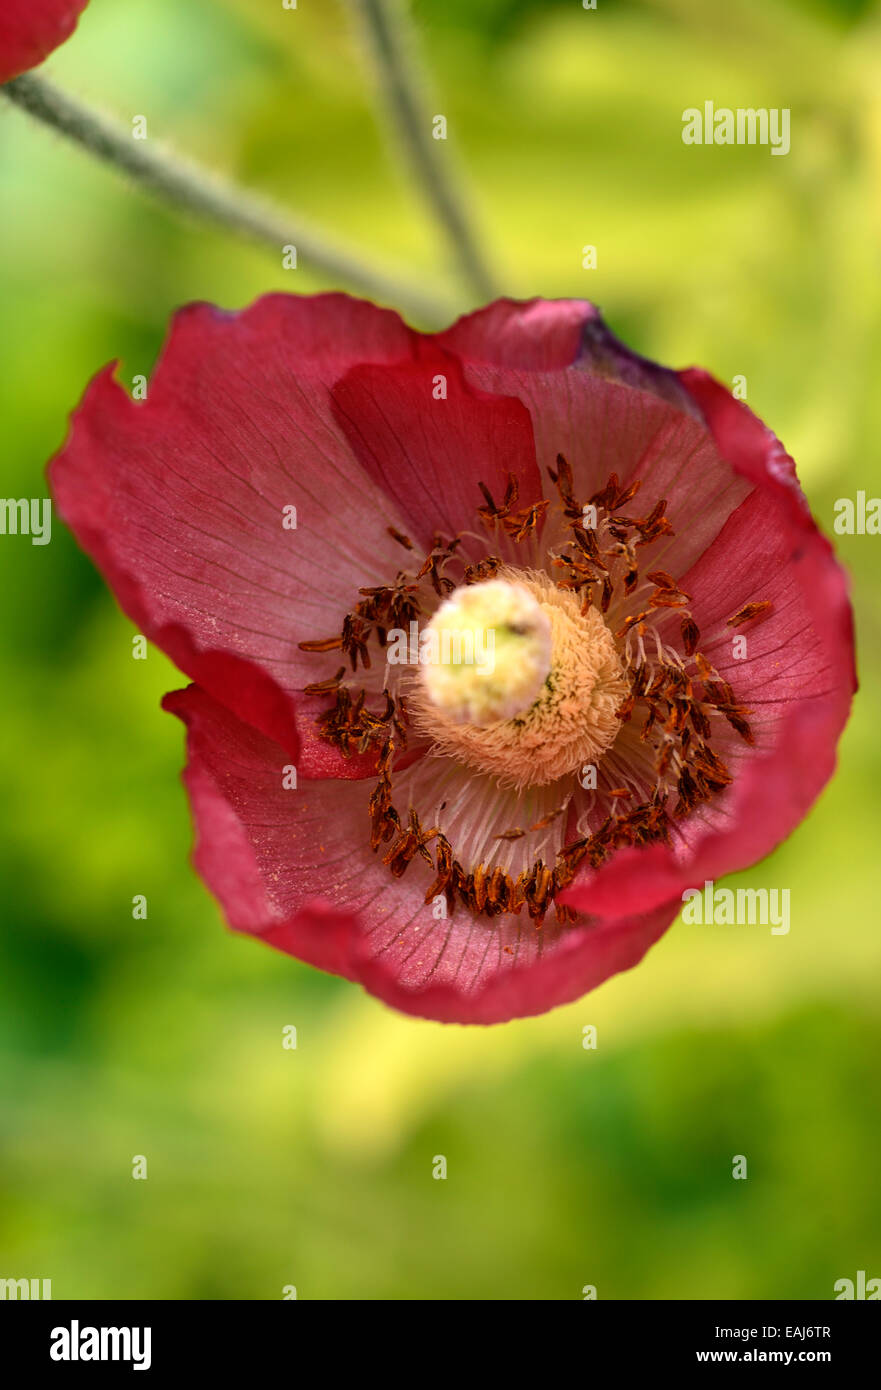 Meconopsis Napaulensis red poppy biennial Nepalese nepal Himalayan poppies flower flowers RM Floral Stock Photo